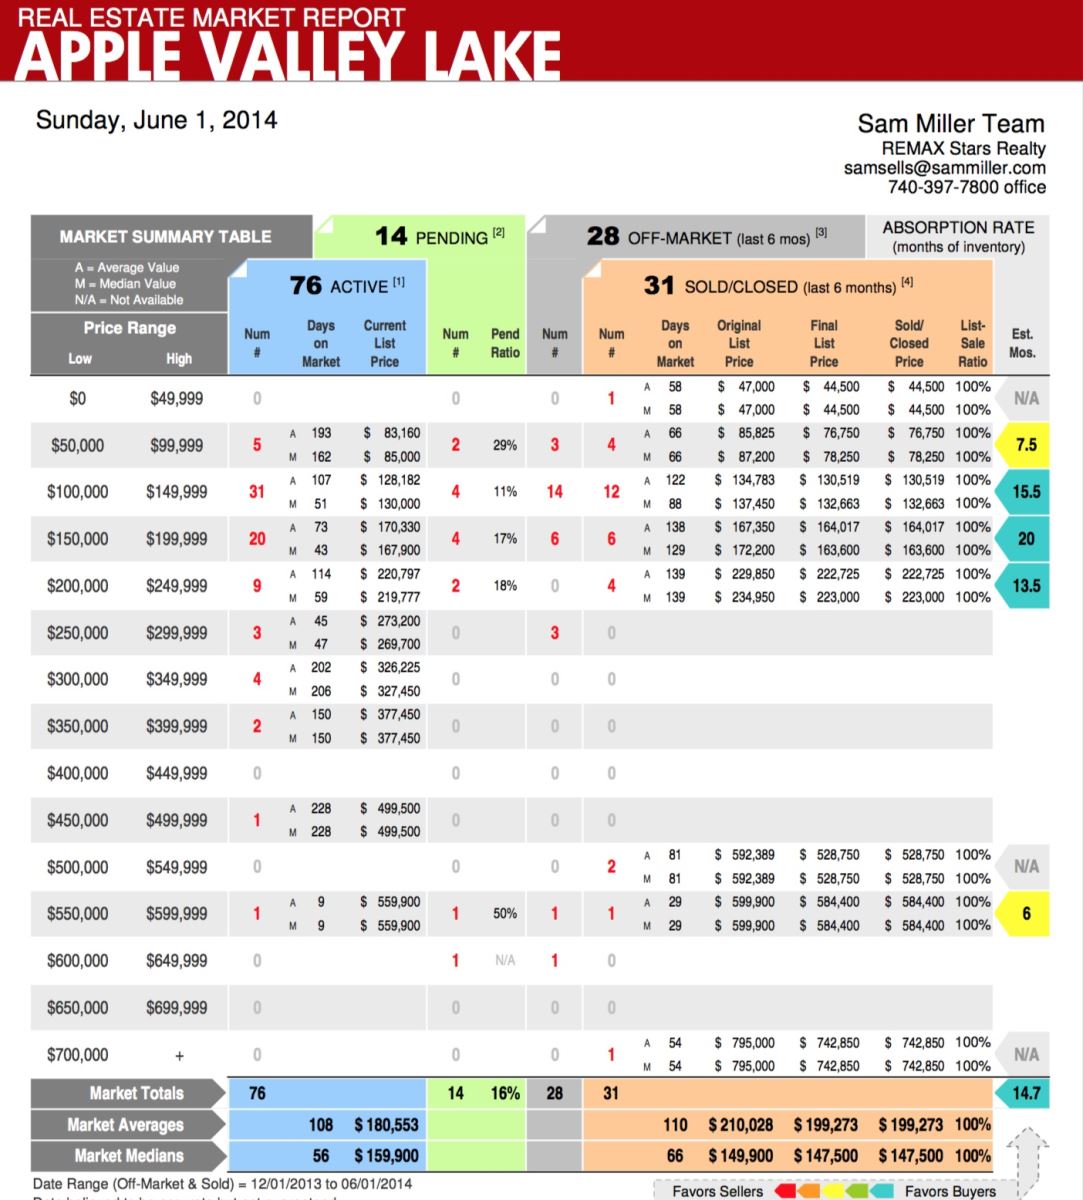 Apple Valley Lake Home Sales Report by Sam Miller on June 1st, 2014